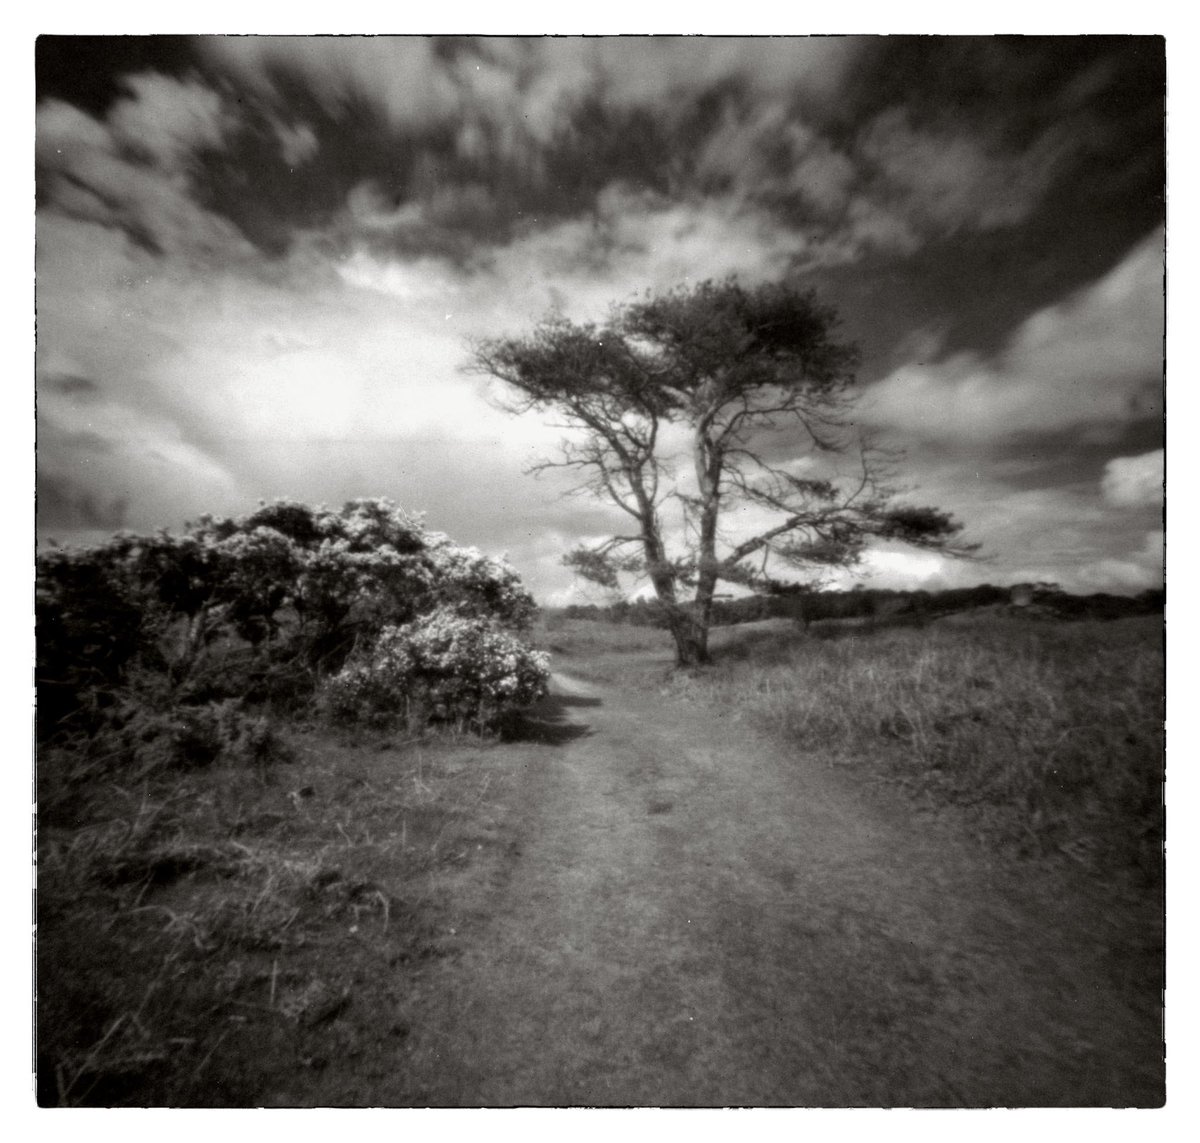 Long expired orwo np22 developed as foma 200 because I forgot what film I had loaded in the Zero Image 2000 pinhole camera back in 2023 and only processed last week  . Sometimes luck is on your side #filmphotography #pinhole